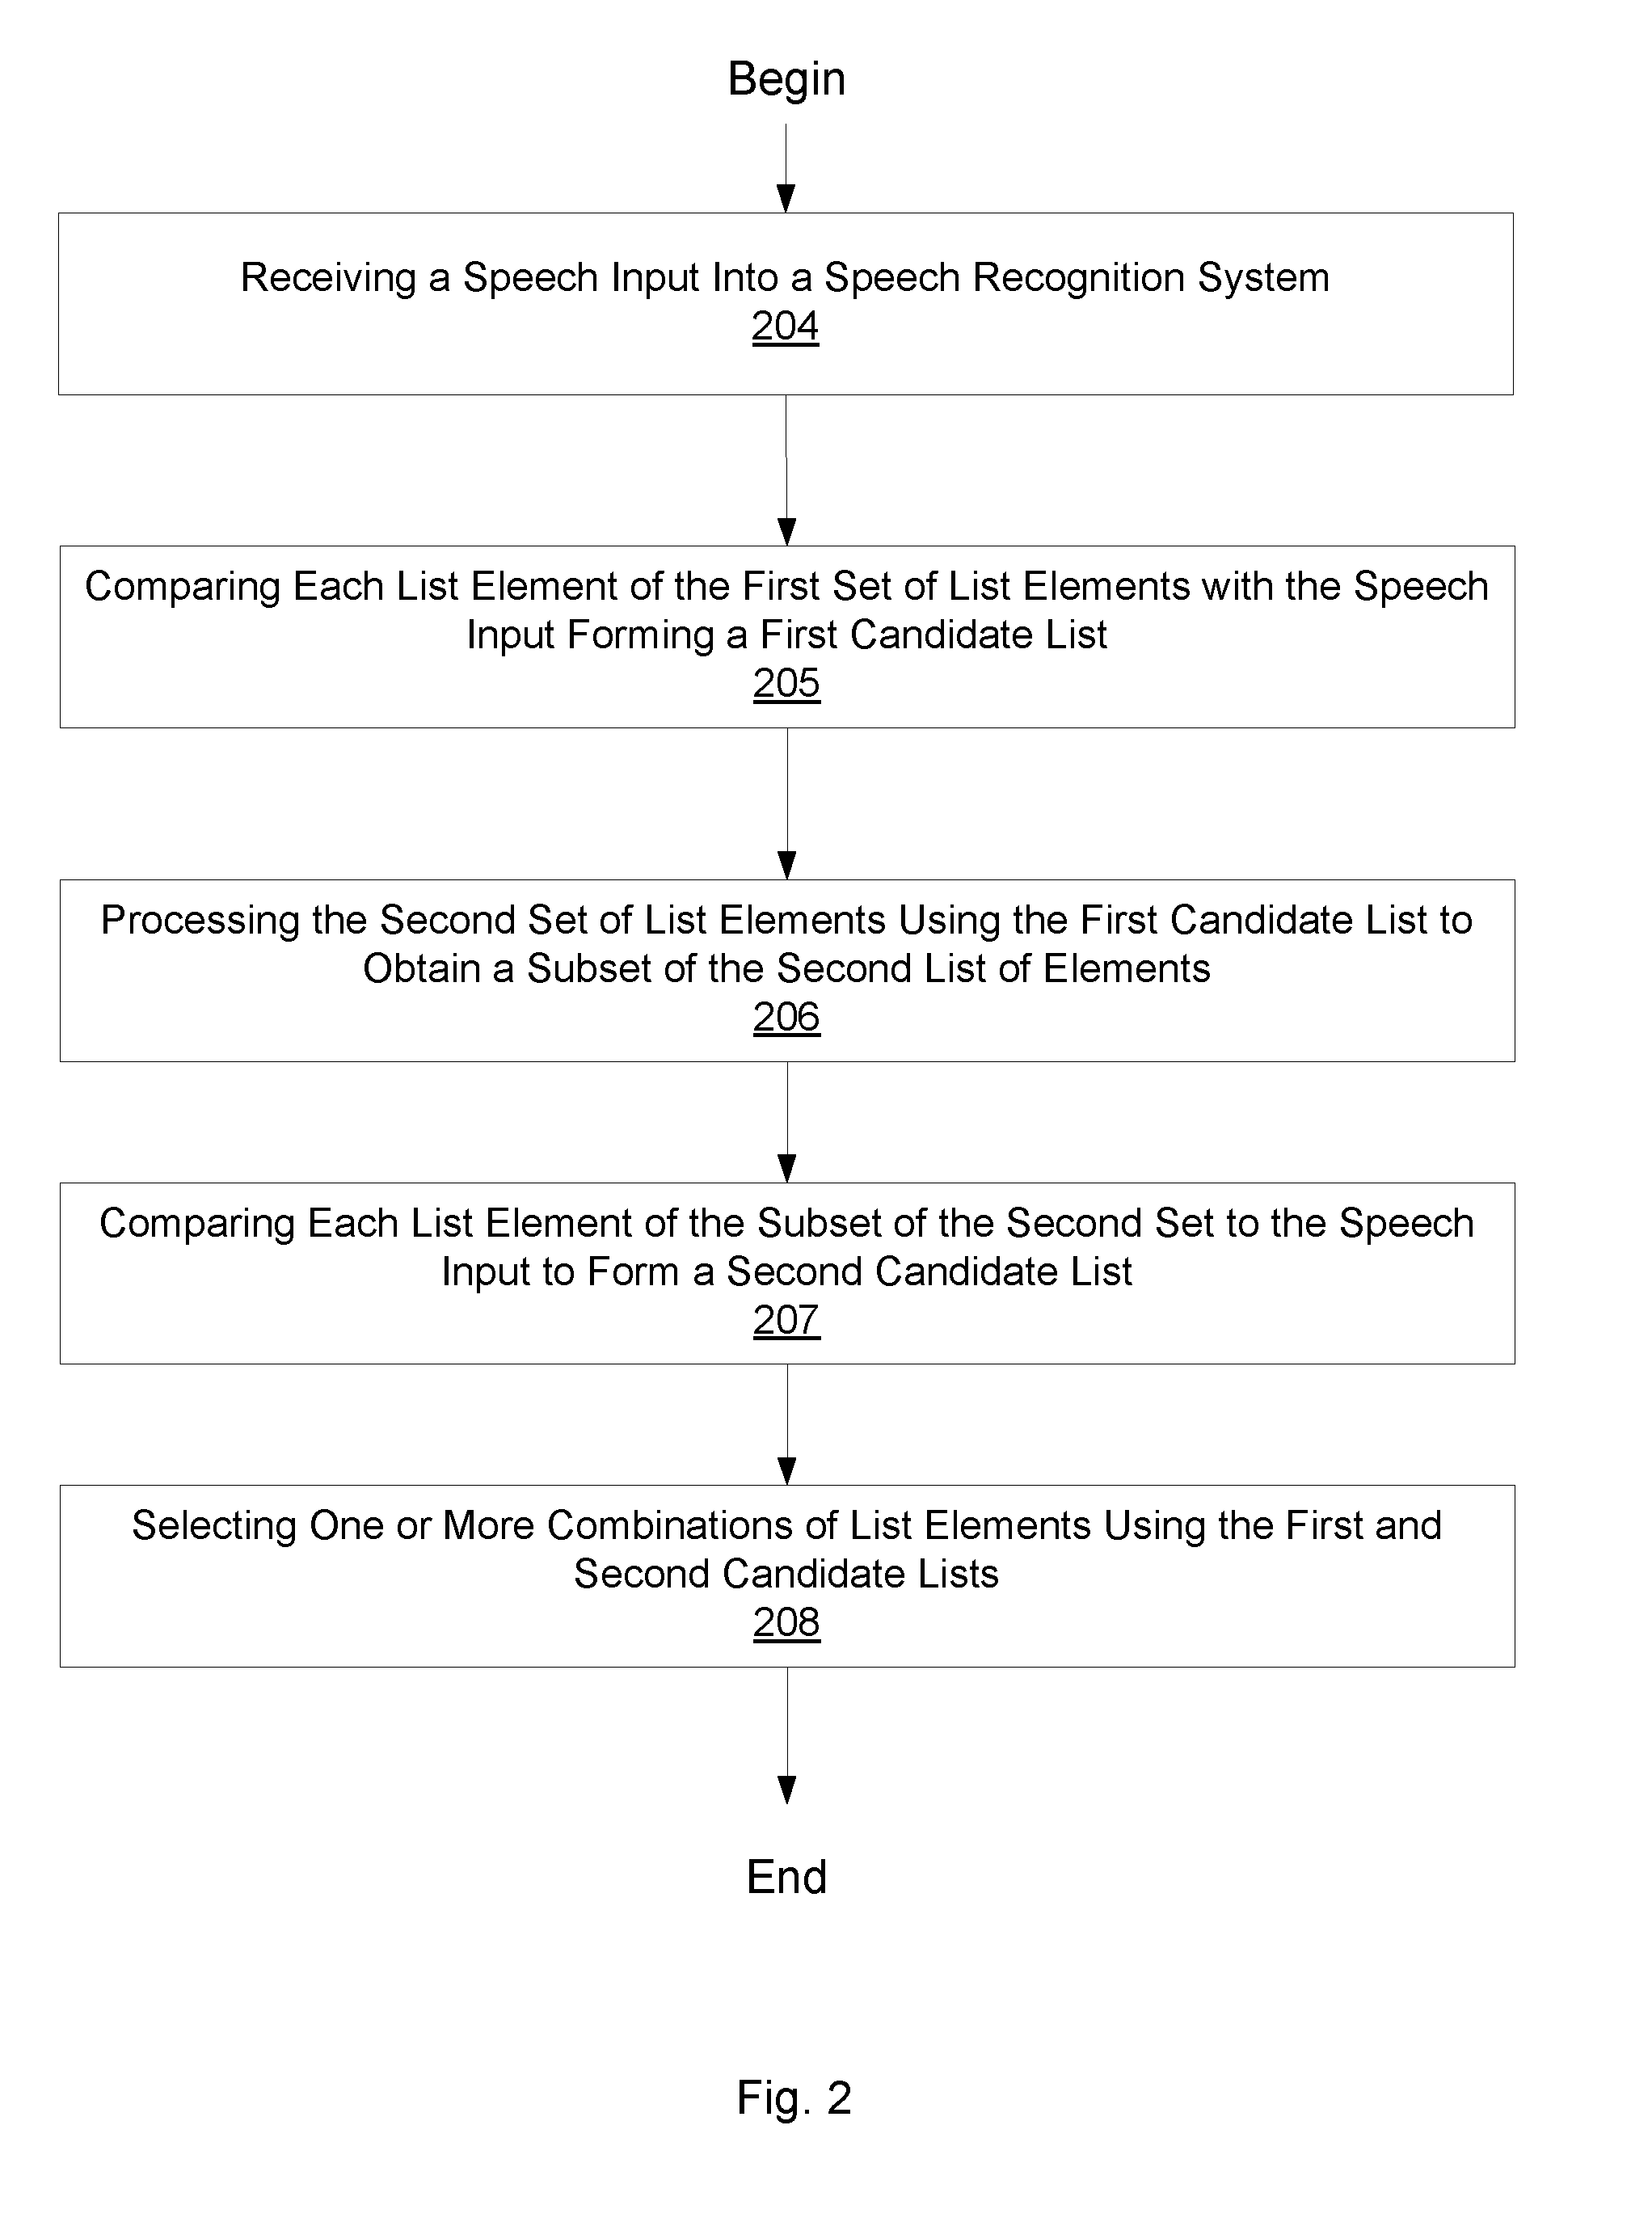 Speech Recognition Method for Selecting a Combination of List Elements via a Speech Input